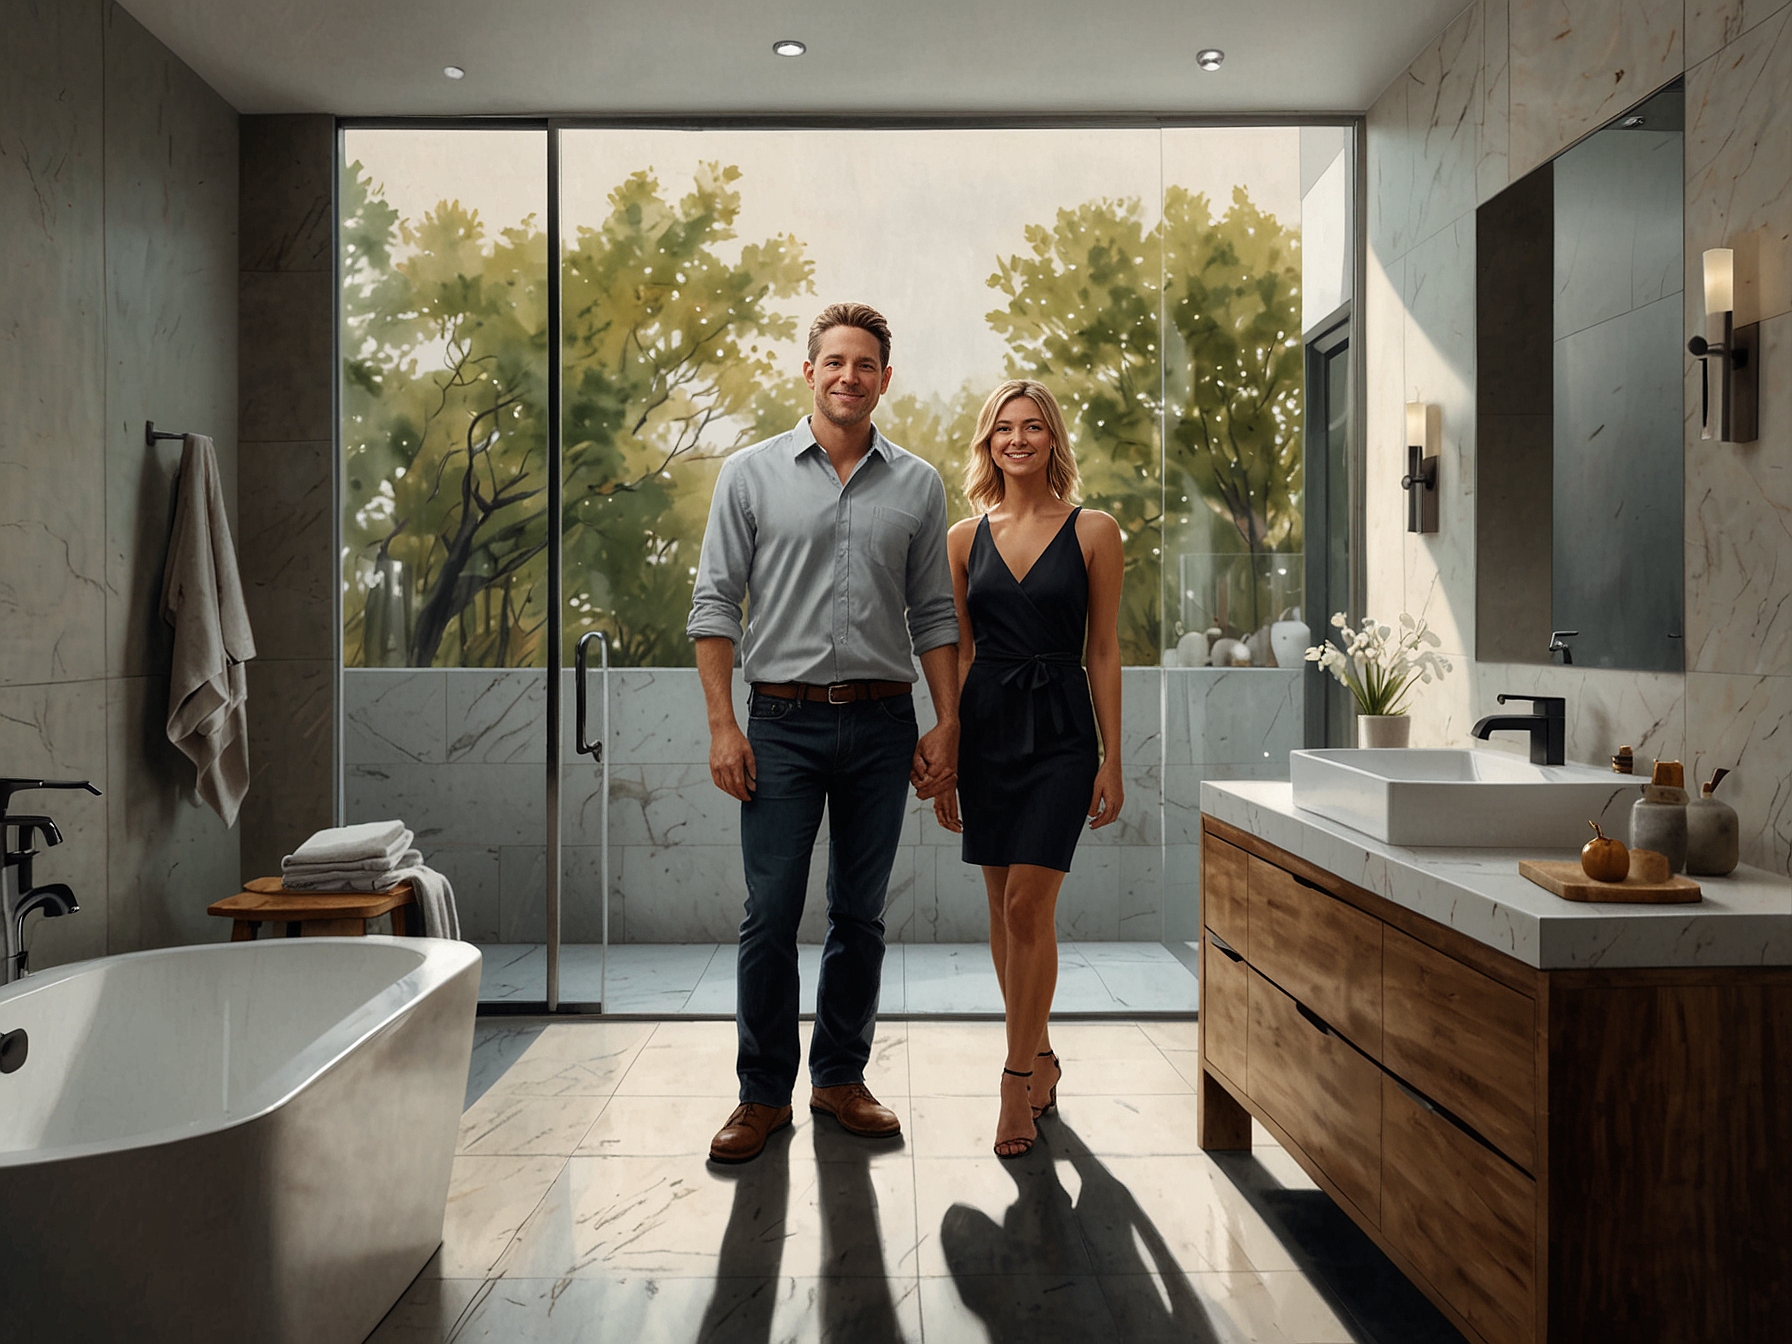 Jenna and Mark standing in their newly remodeled bathroom, showcasing the sleek walk-in shower, modern bathtub, and updated fixtures with a double vanity.